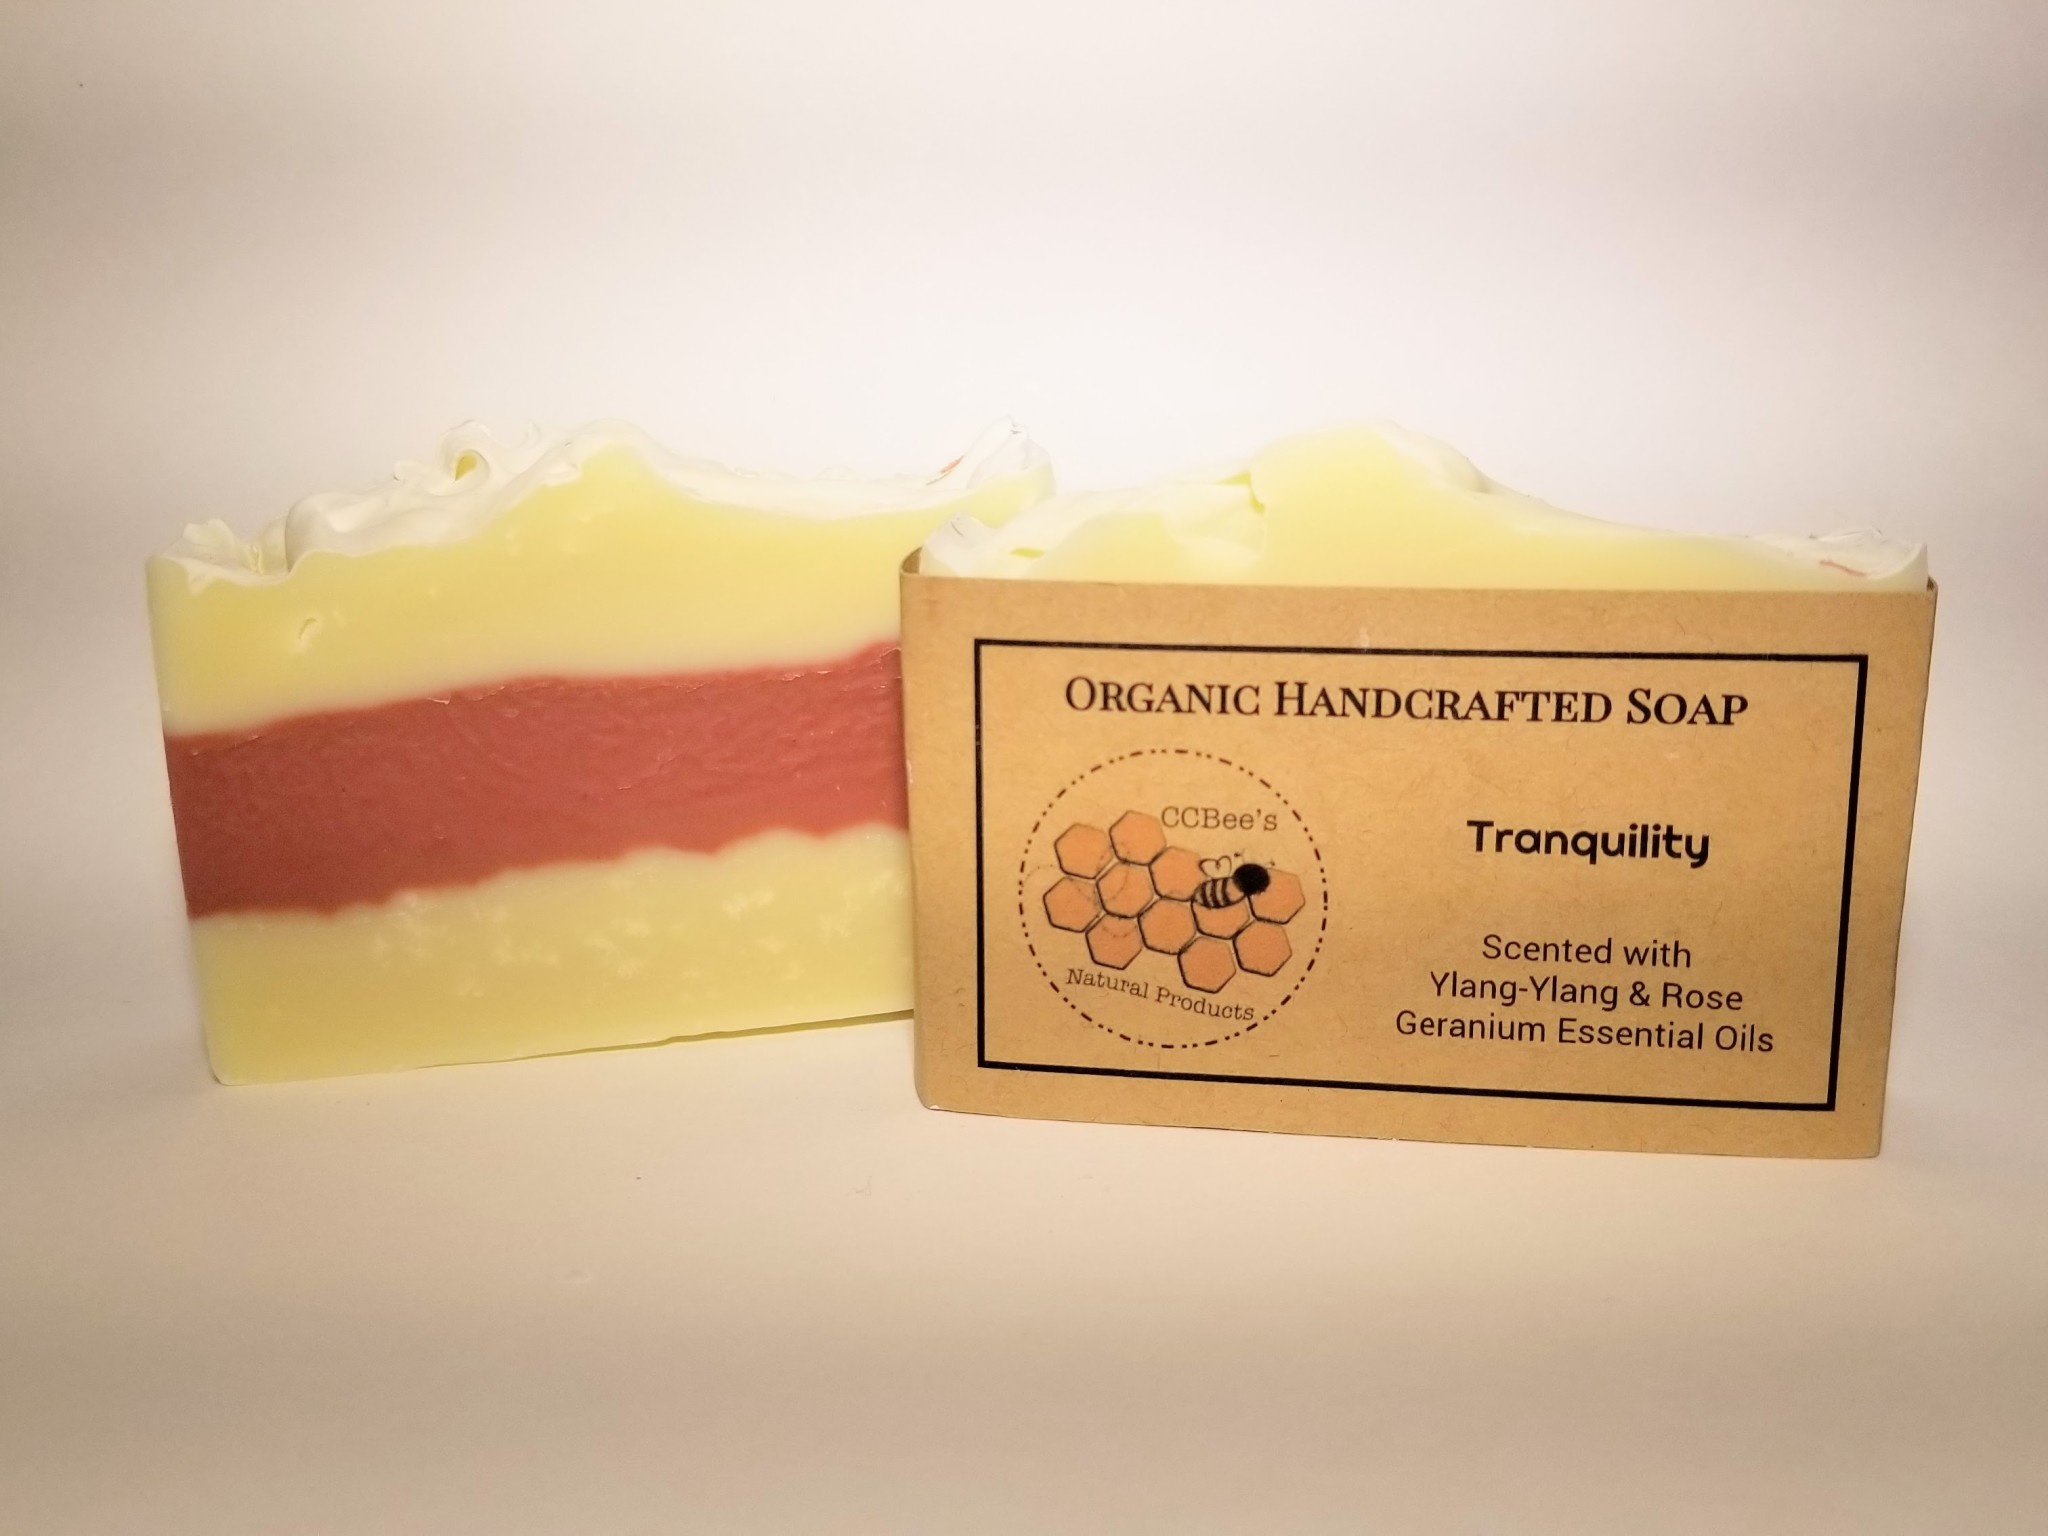 CCBee's Natural Products Soap: Tranquility